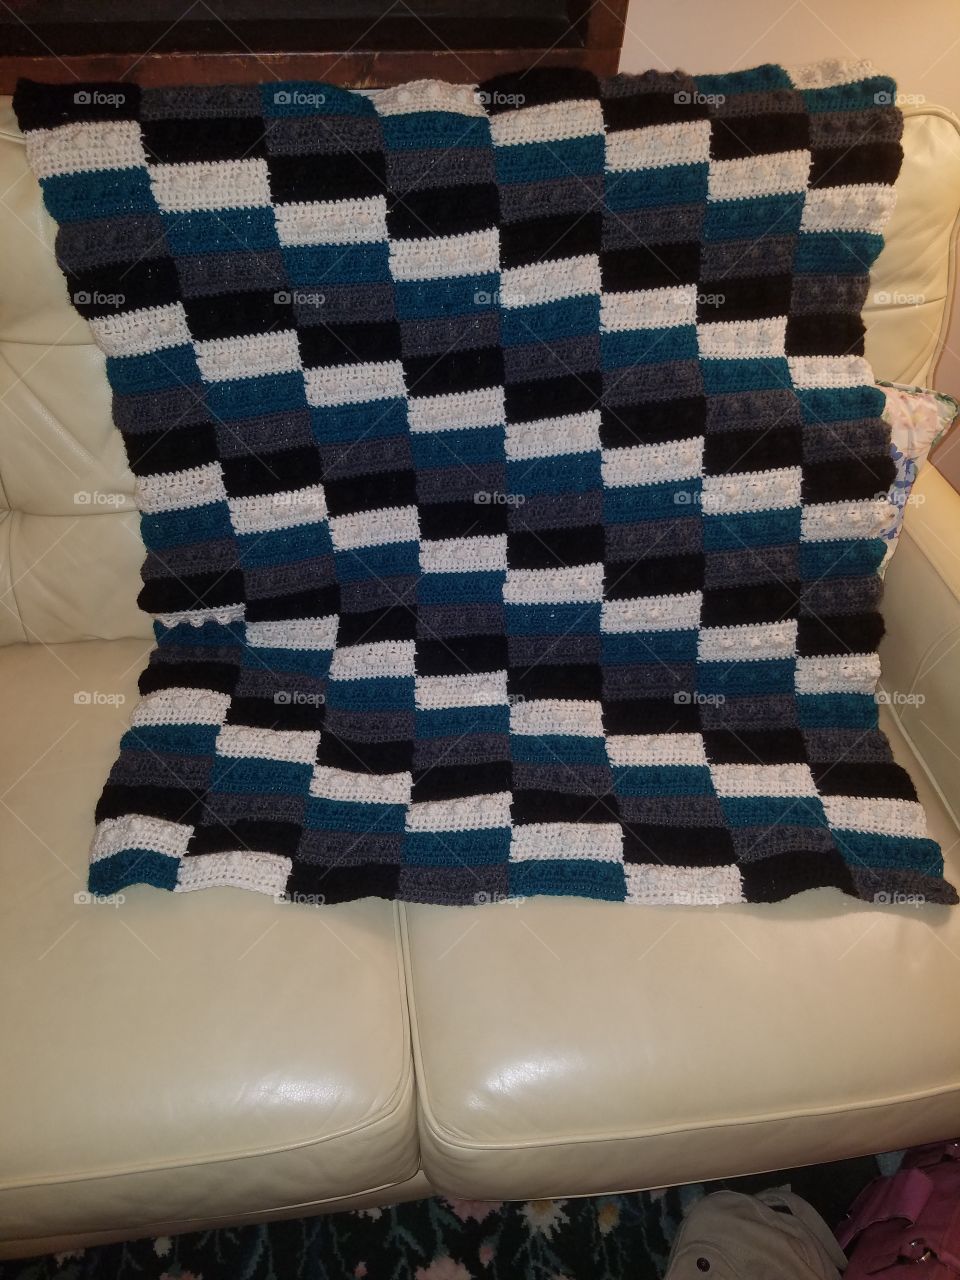 My fan art Crochet Lego blanket I make and even personalize for birthdate or due date for babies.